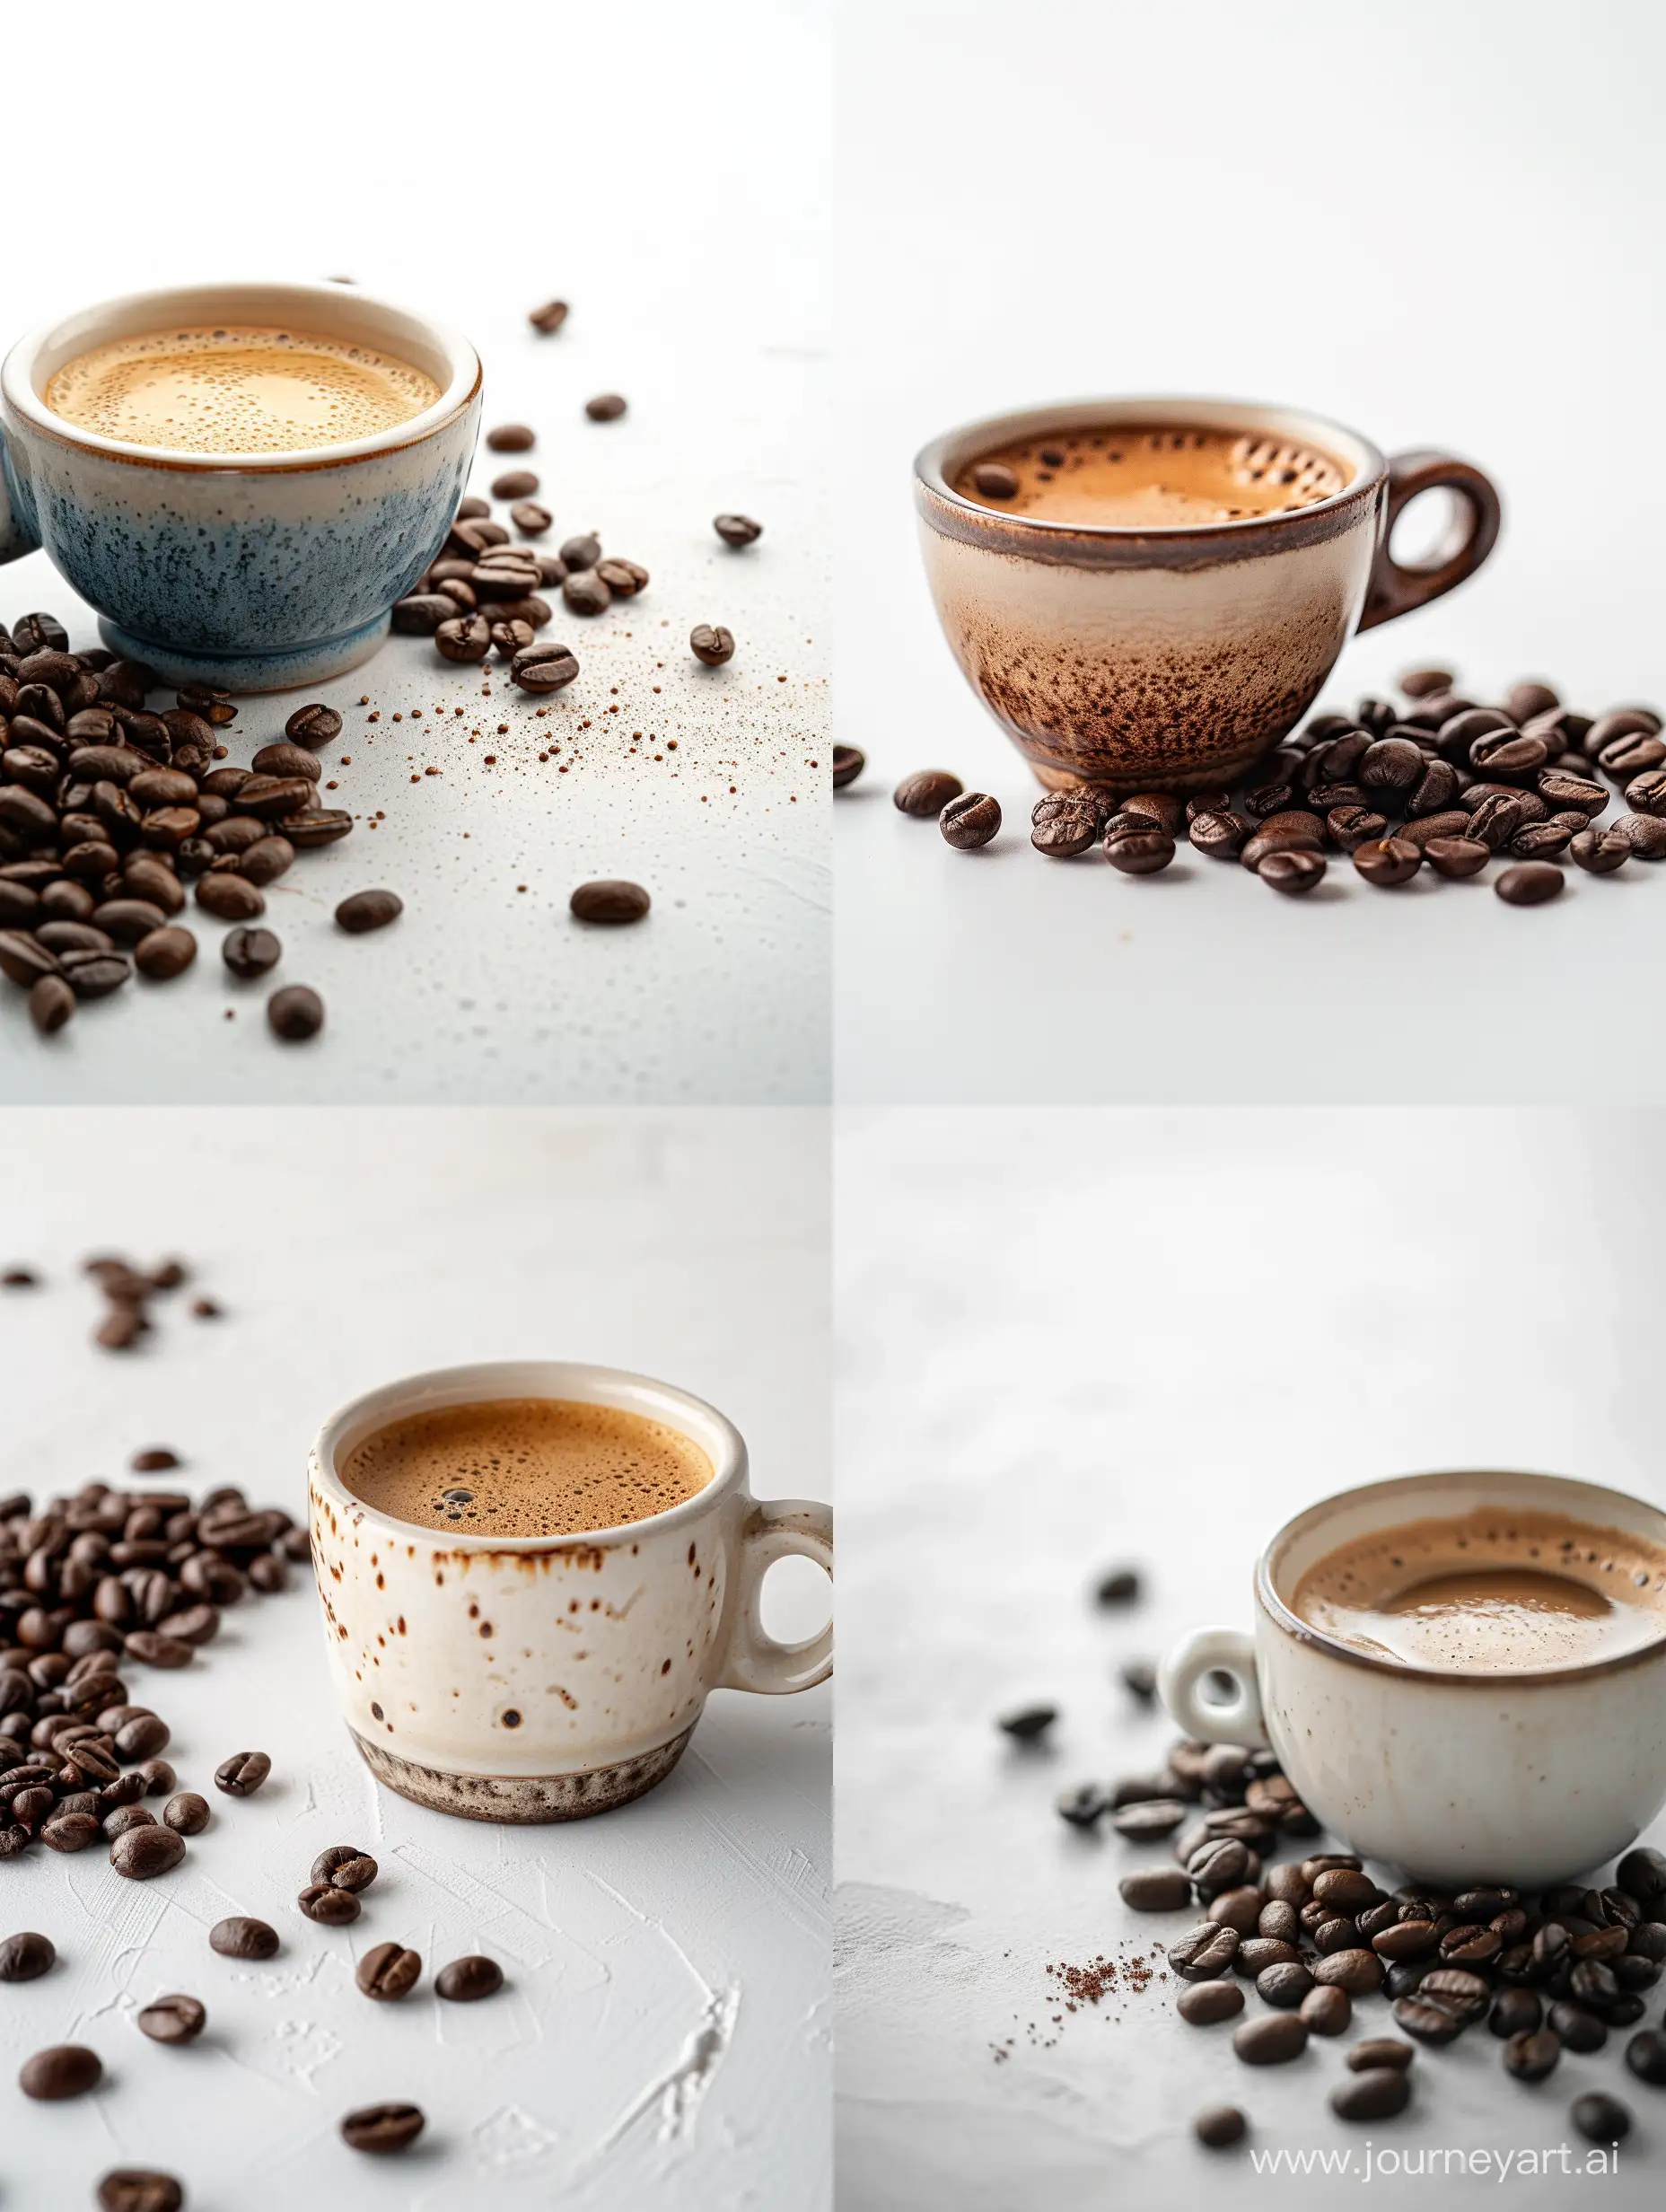 Coffee-Cup-and-Beans-on-White-Background-HighQuality-Canon-EOS-R6-Mark-II-Photo